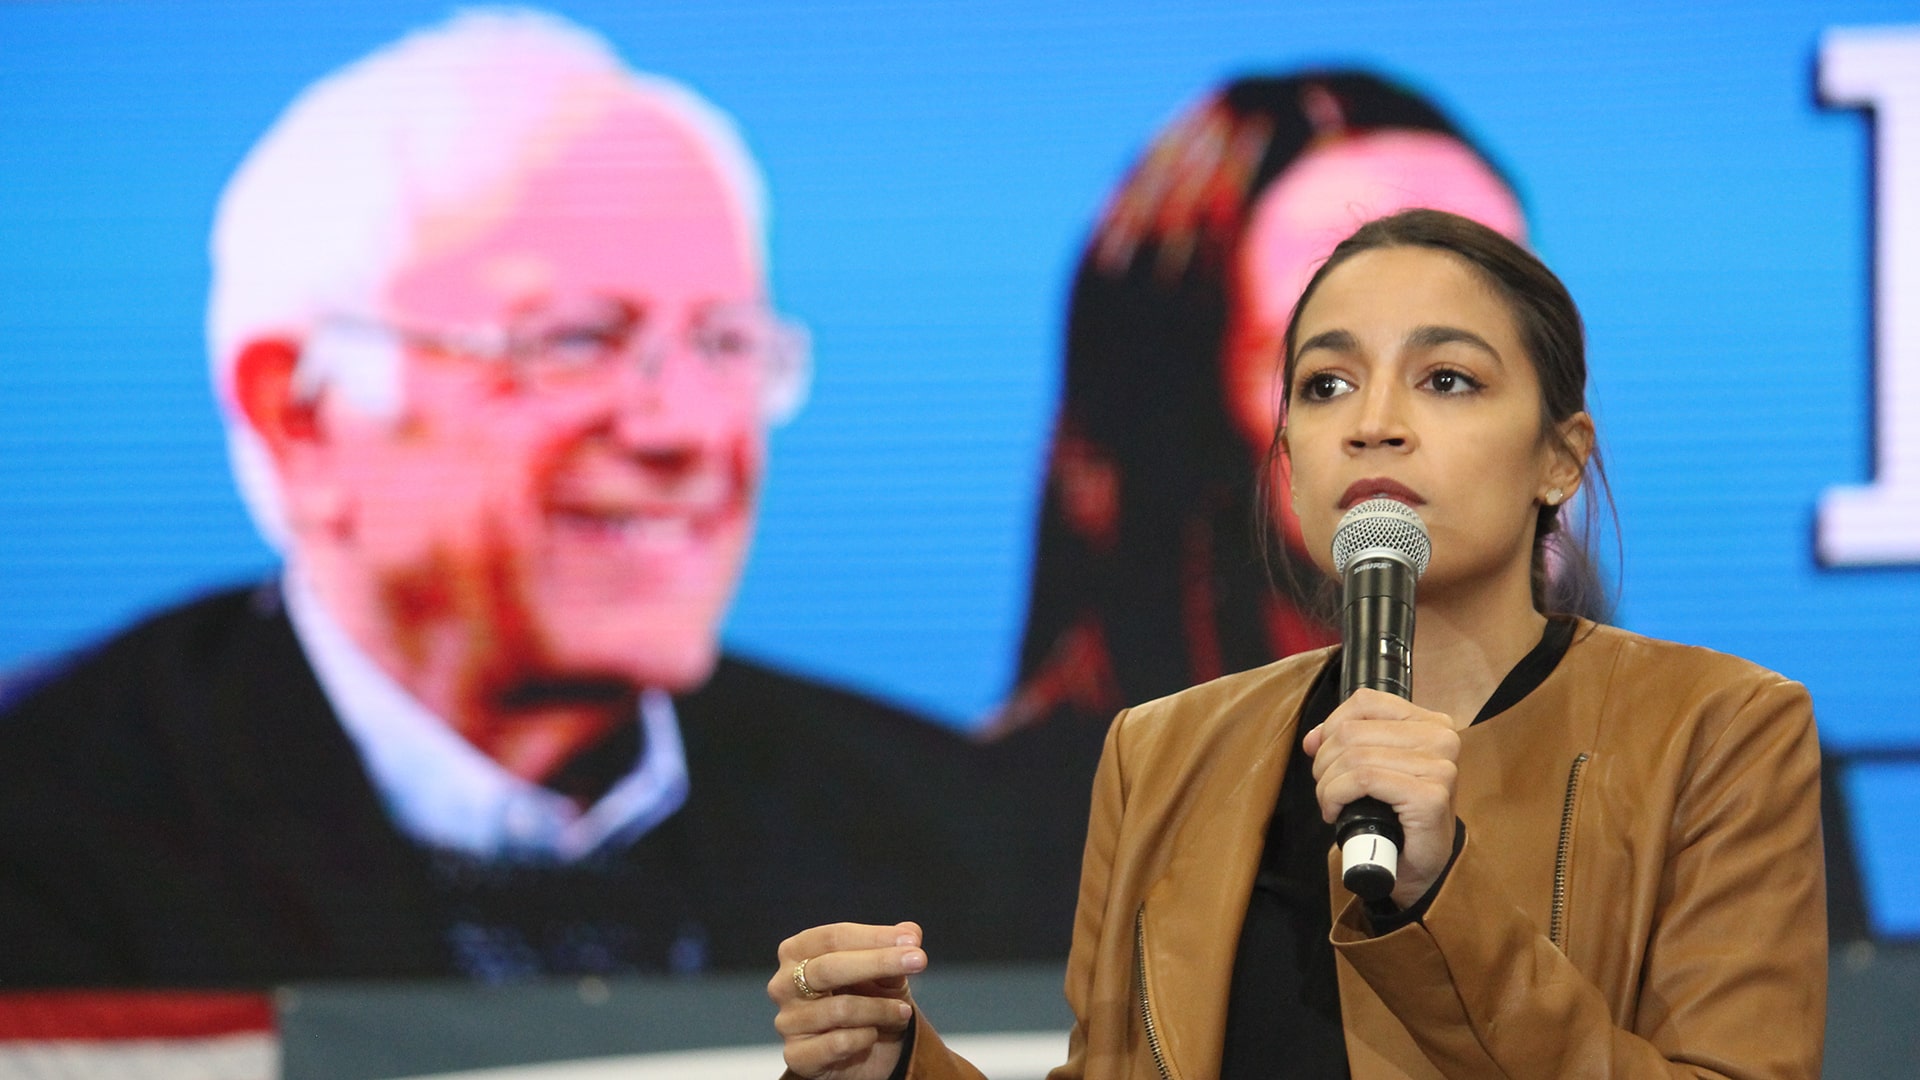 Rep. Alexandria Ocasio-Cortez speaking to attendees at a rally for Bernie Sanders in Council Bluffs, Iowa. Please attribute to Matt A.J. if used elsewhere. Matt Johnson via Wiki Commons.